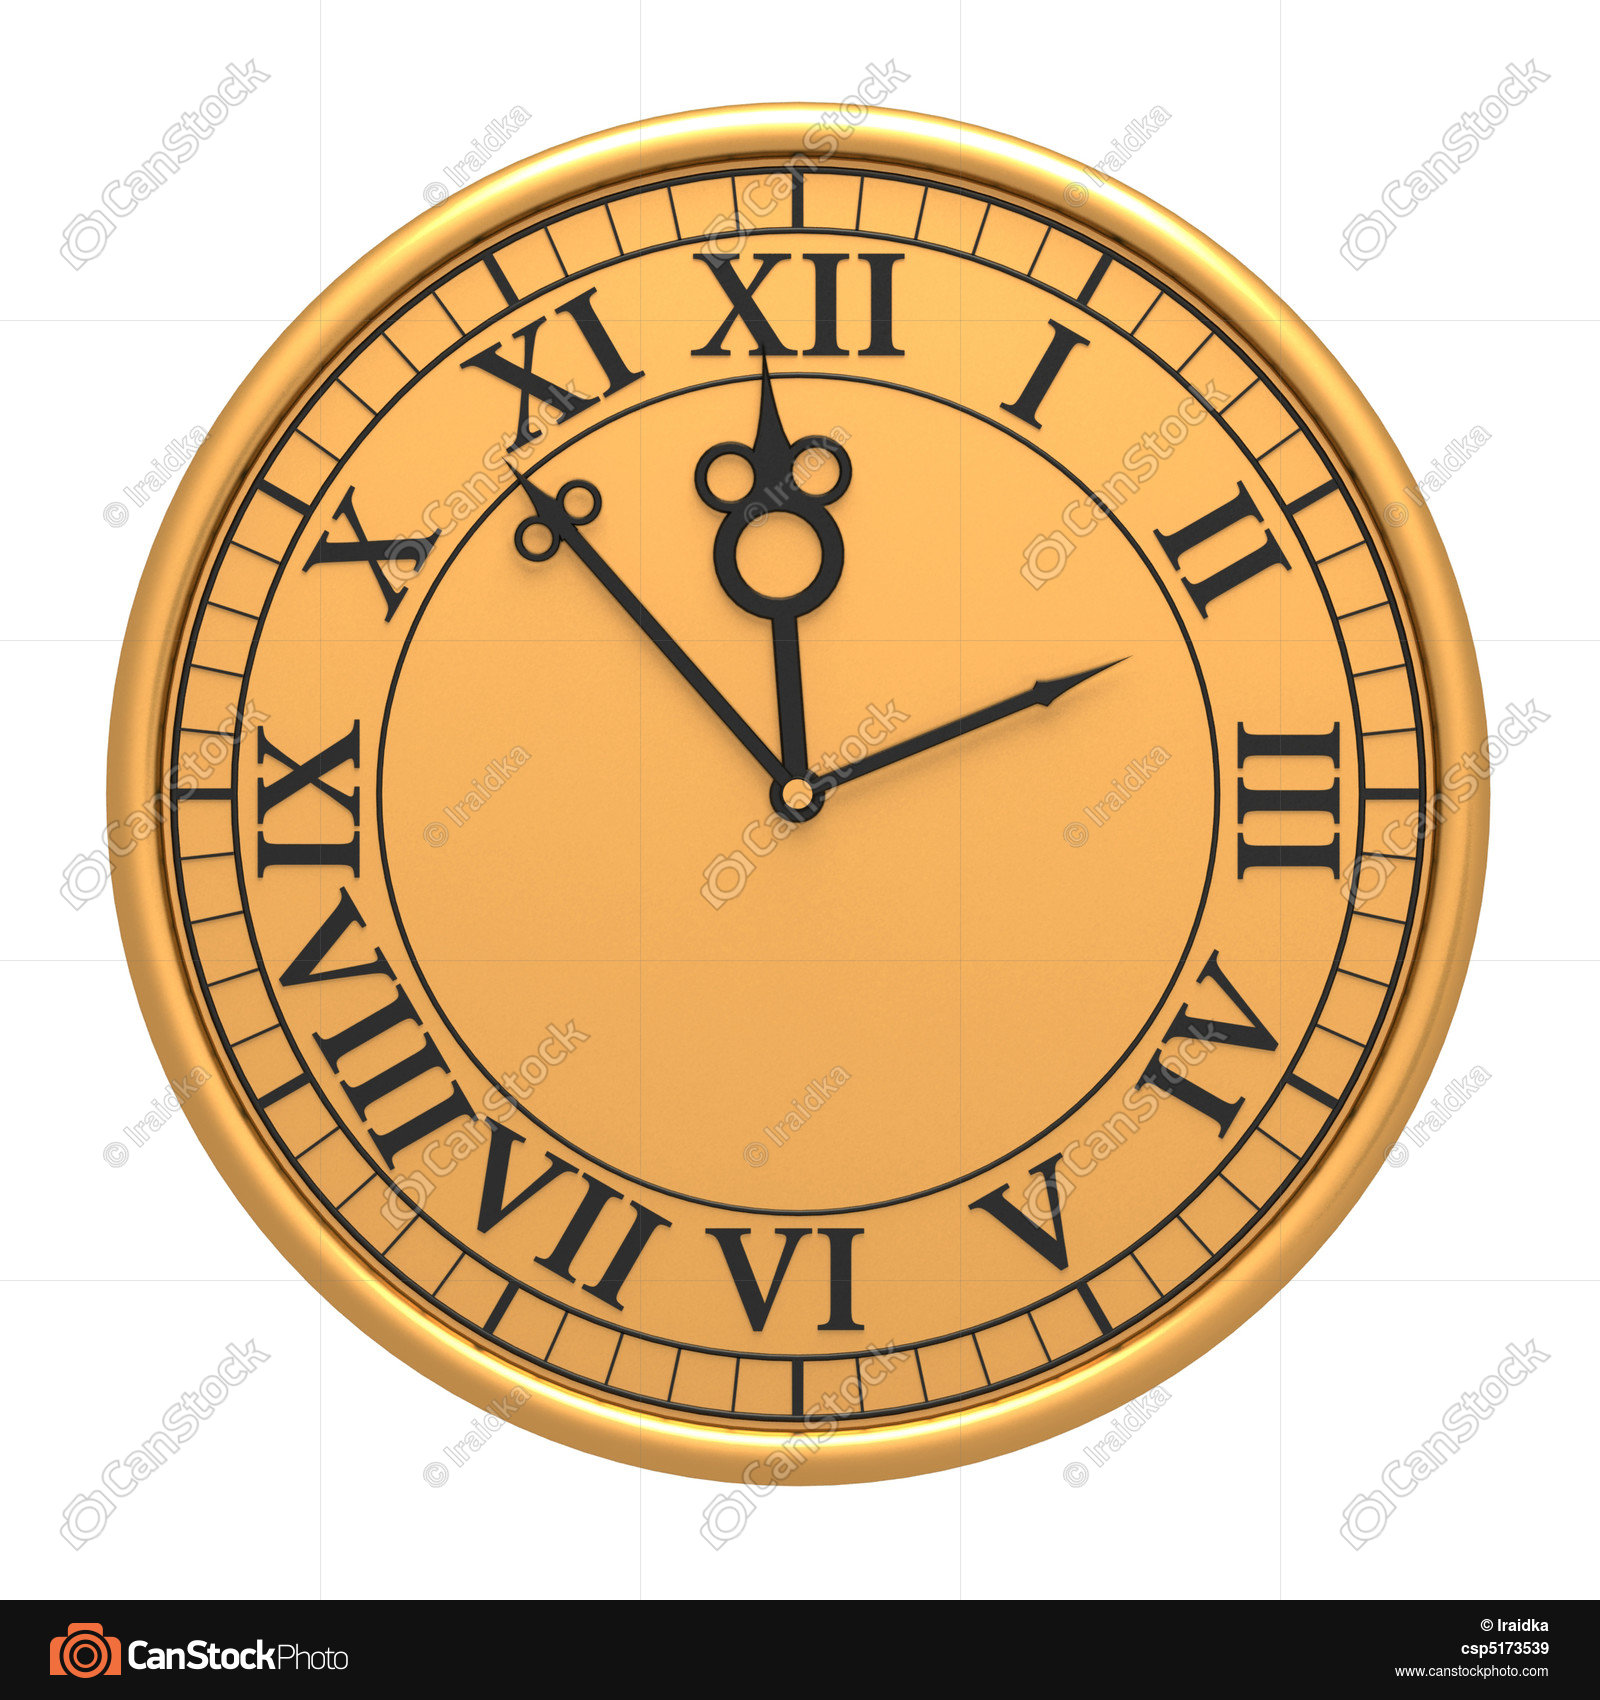 3d antique old clock on white background stock illustration - Search ...